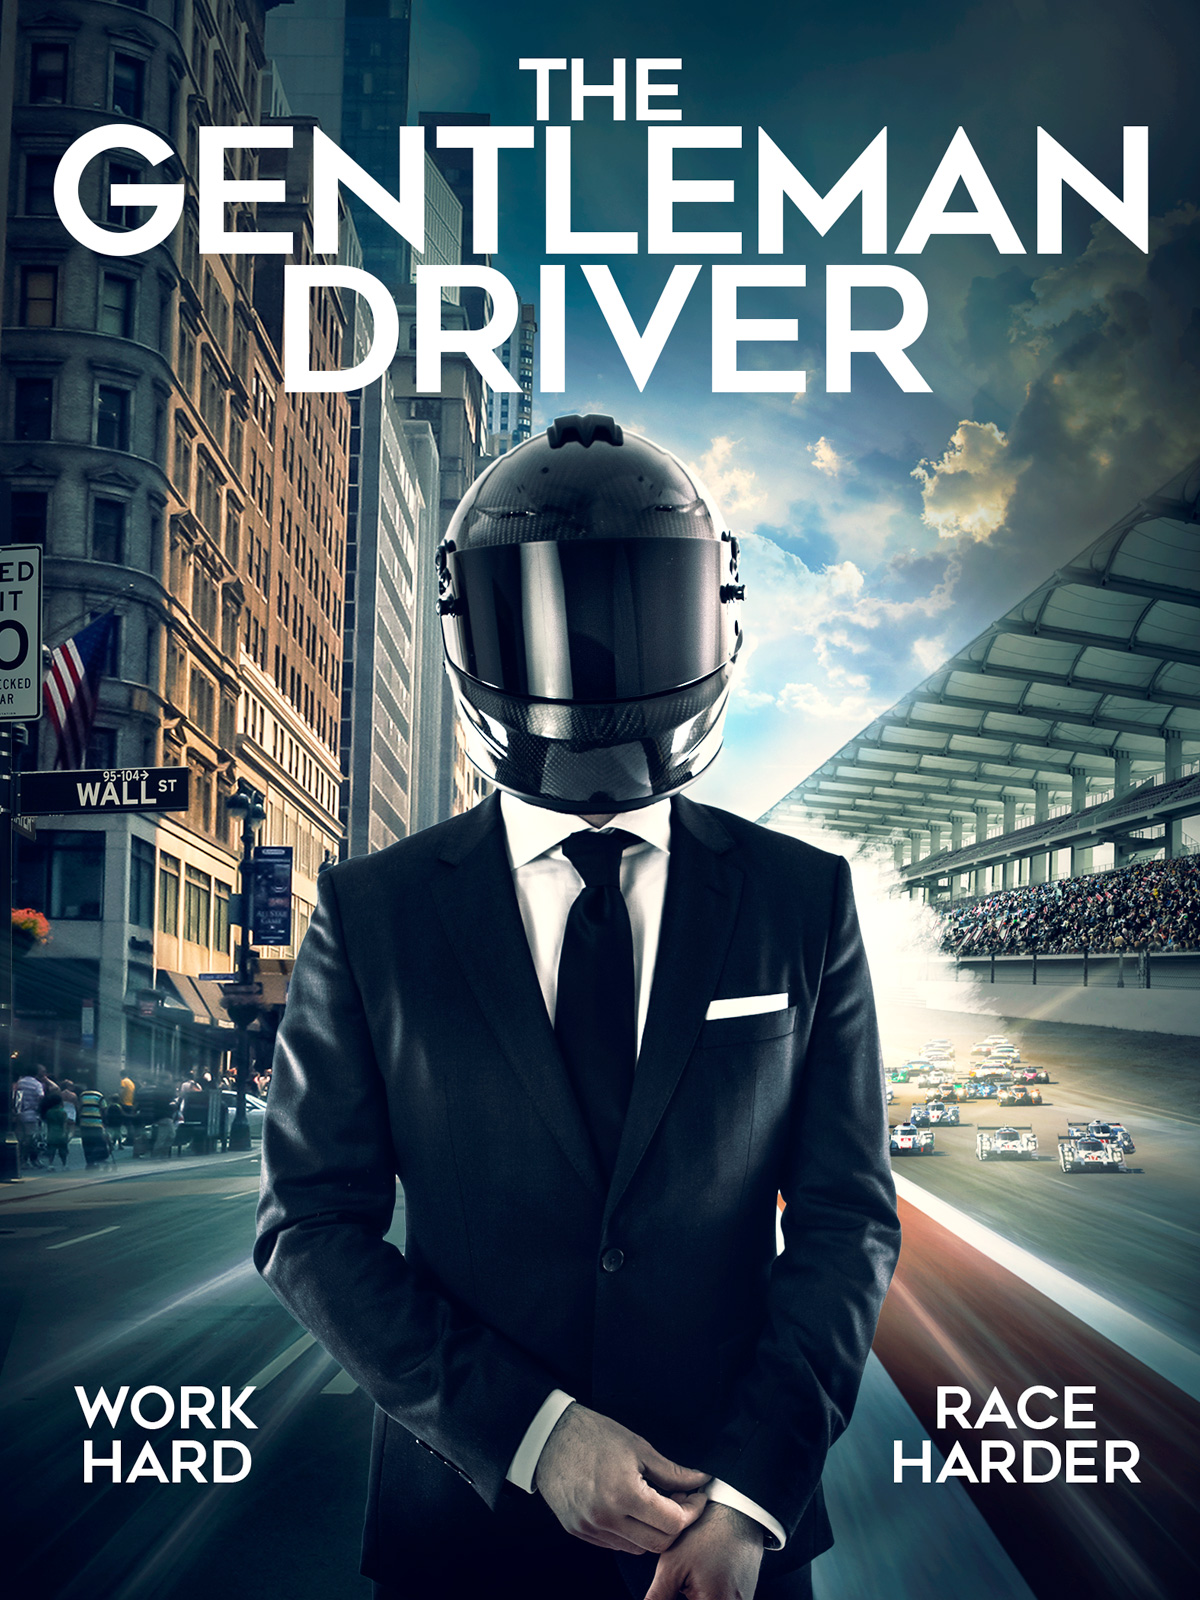 Here's A Look At New Racing Documentary 'The Gentleman Driver'1200 x 1600